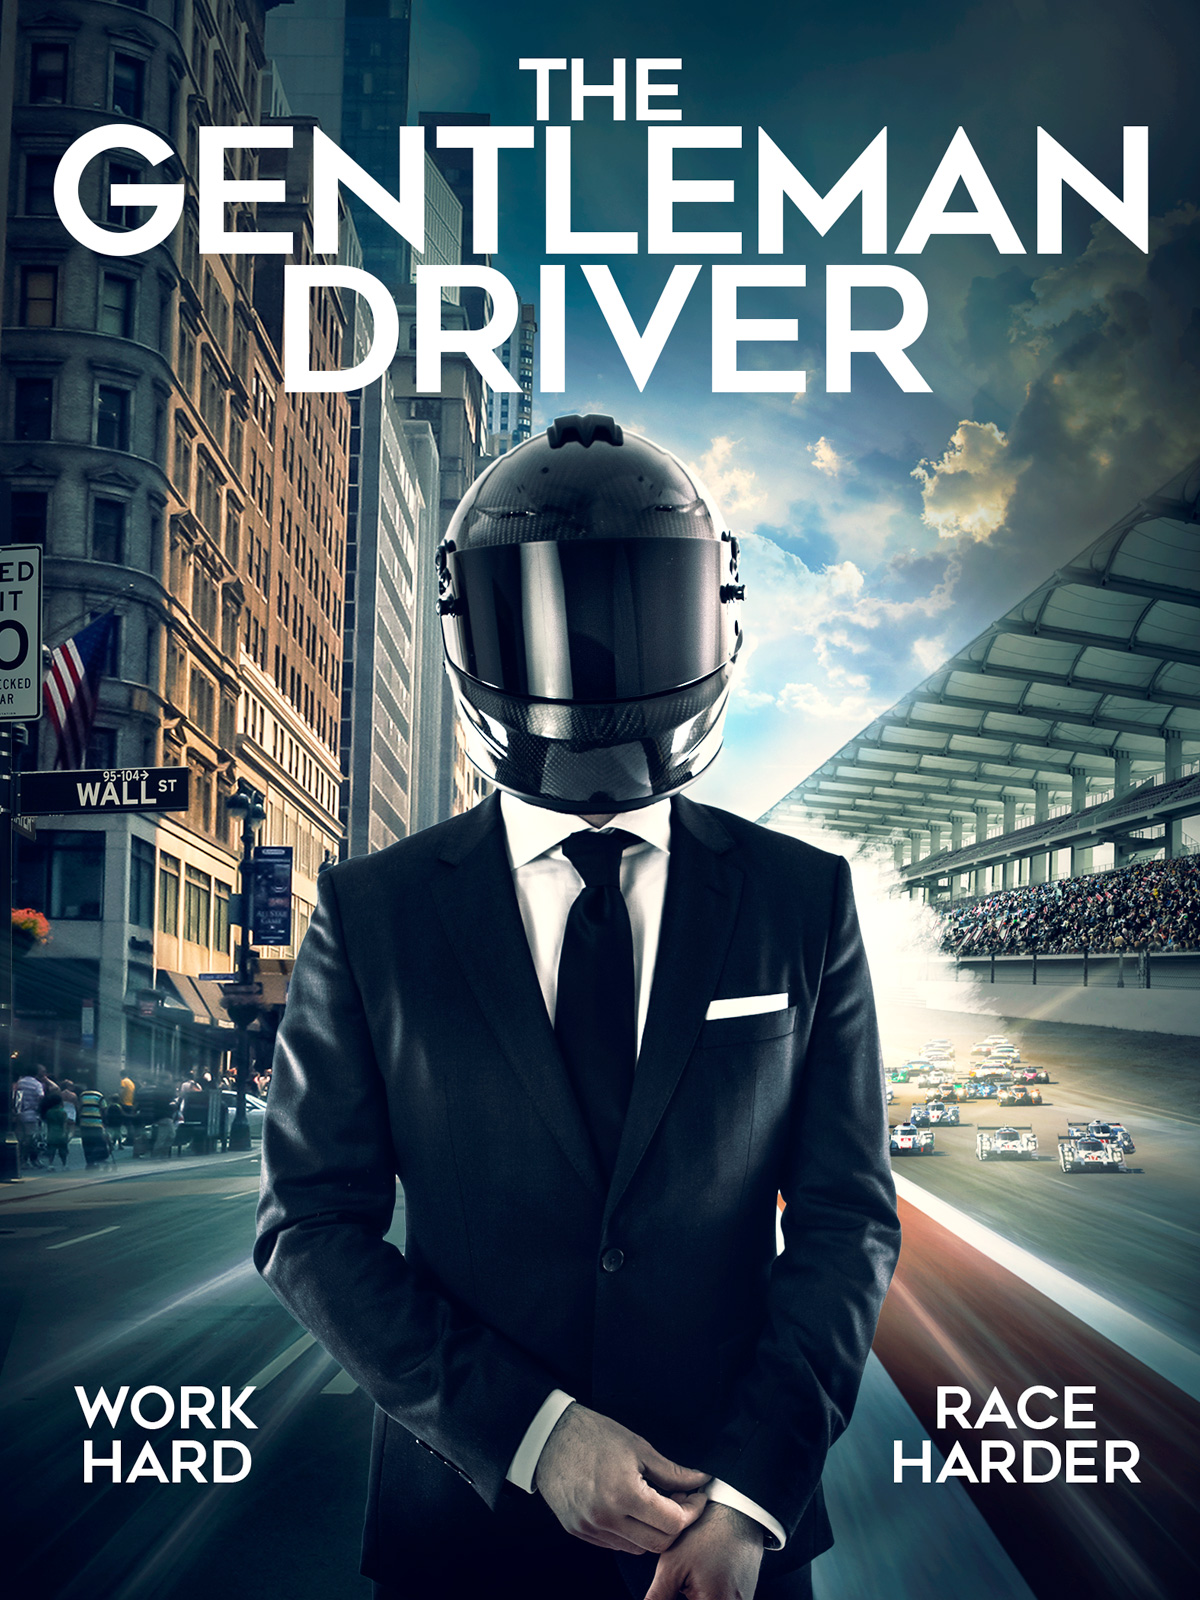 Here's A Look At New Racing Documentary 'The Gentleman Driver'1200 x 1600